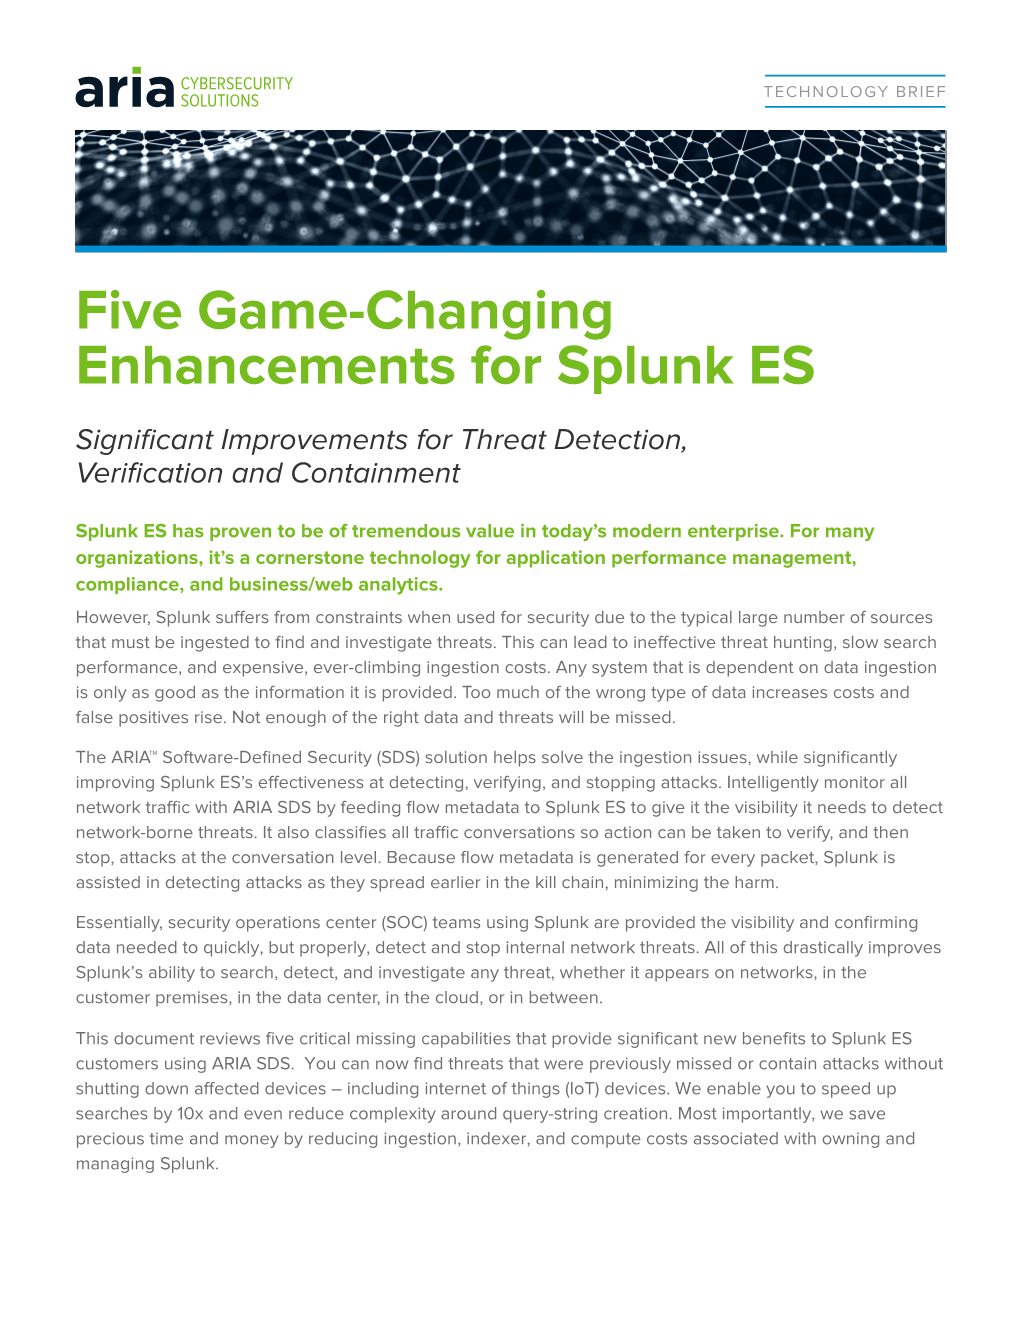 Five Game-Changing Enhancements for Splunk ES Significant Improvements for Threat Detection, Verification and Containment